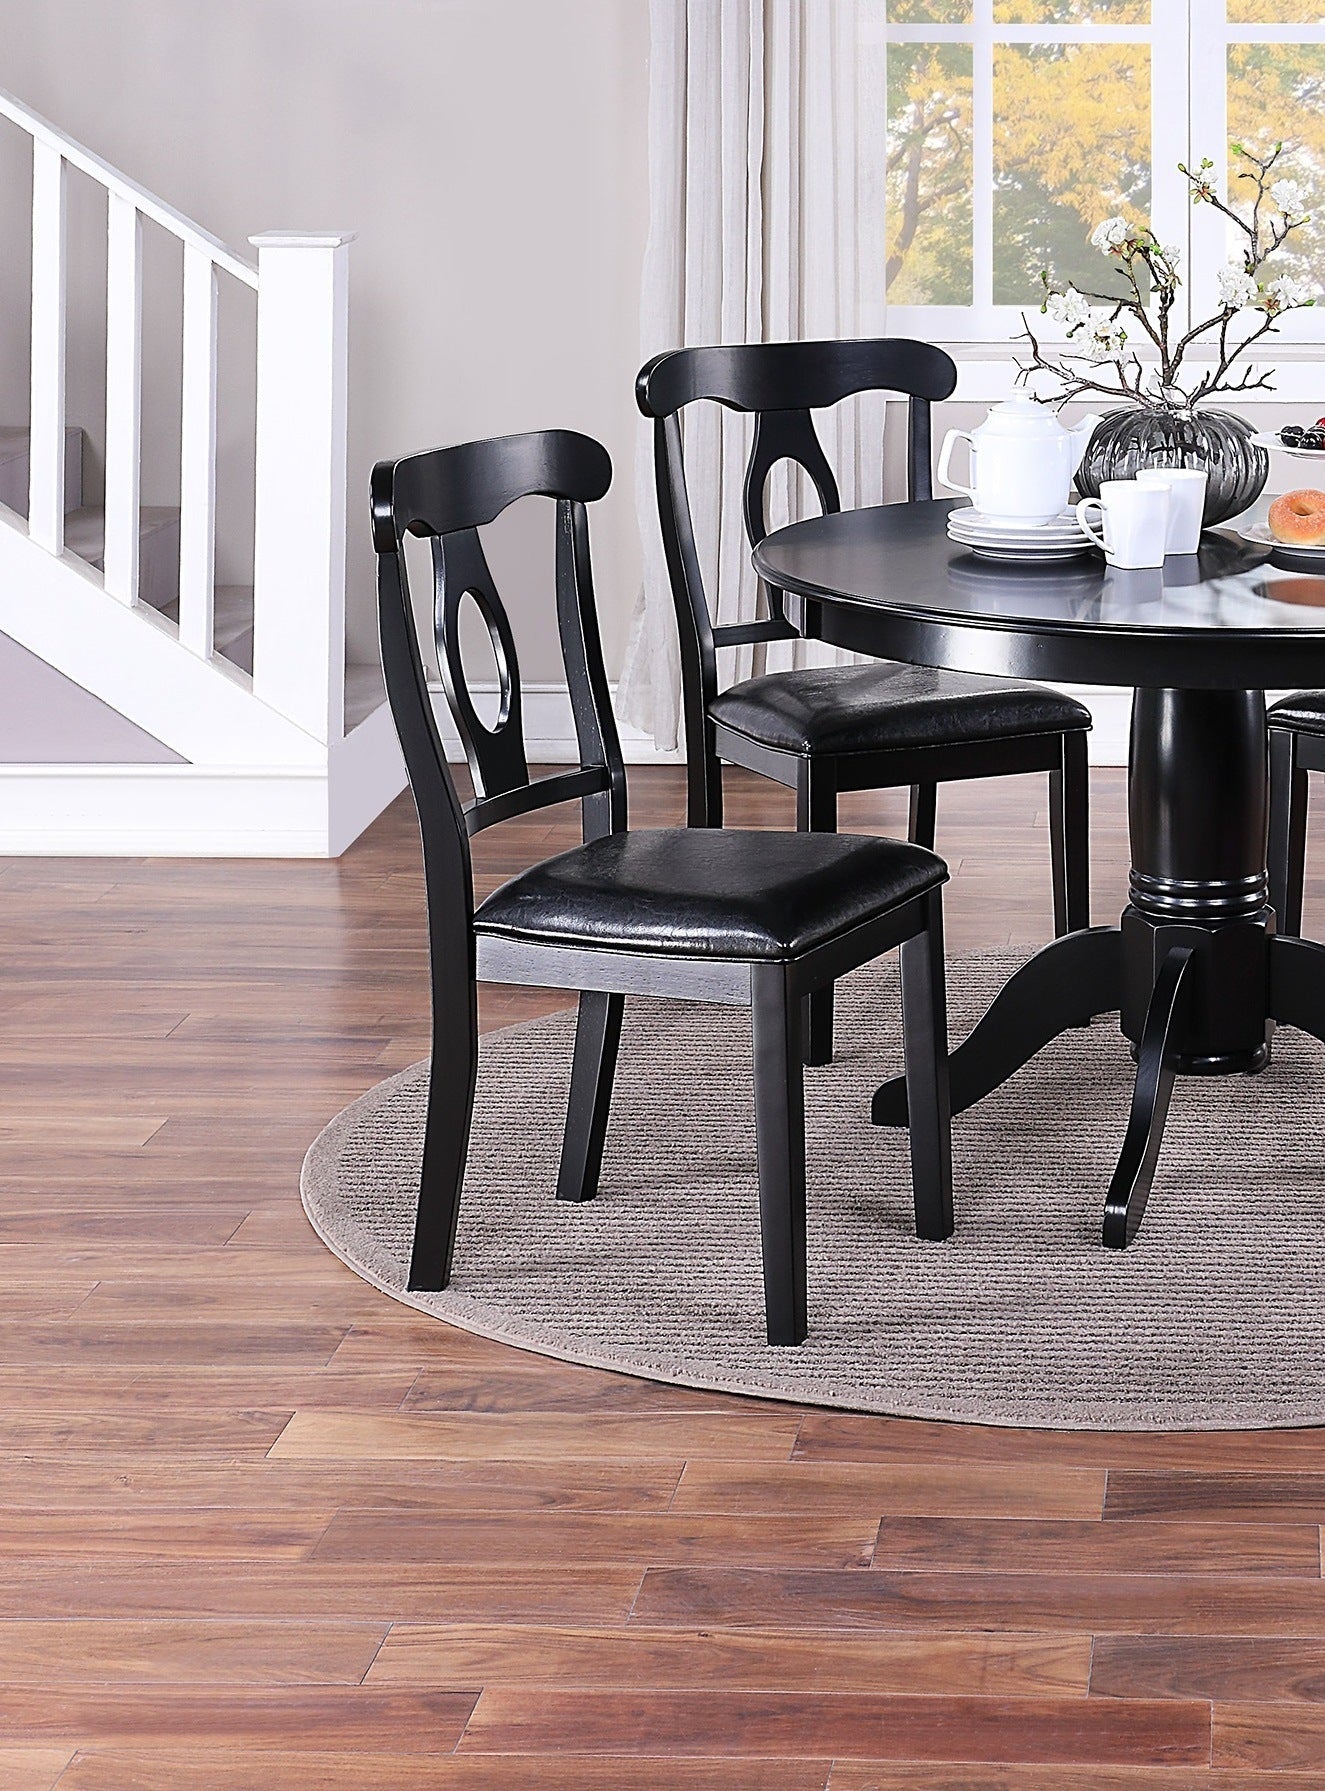 Classic Design Dining Room 5pc Set Round Table 4x side Chairs Cushion Fabric Upholstery Seat Rubberwood Black Color Furniture Home Decor by Design